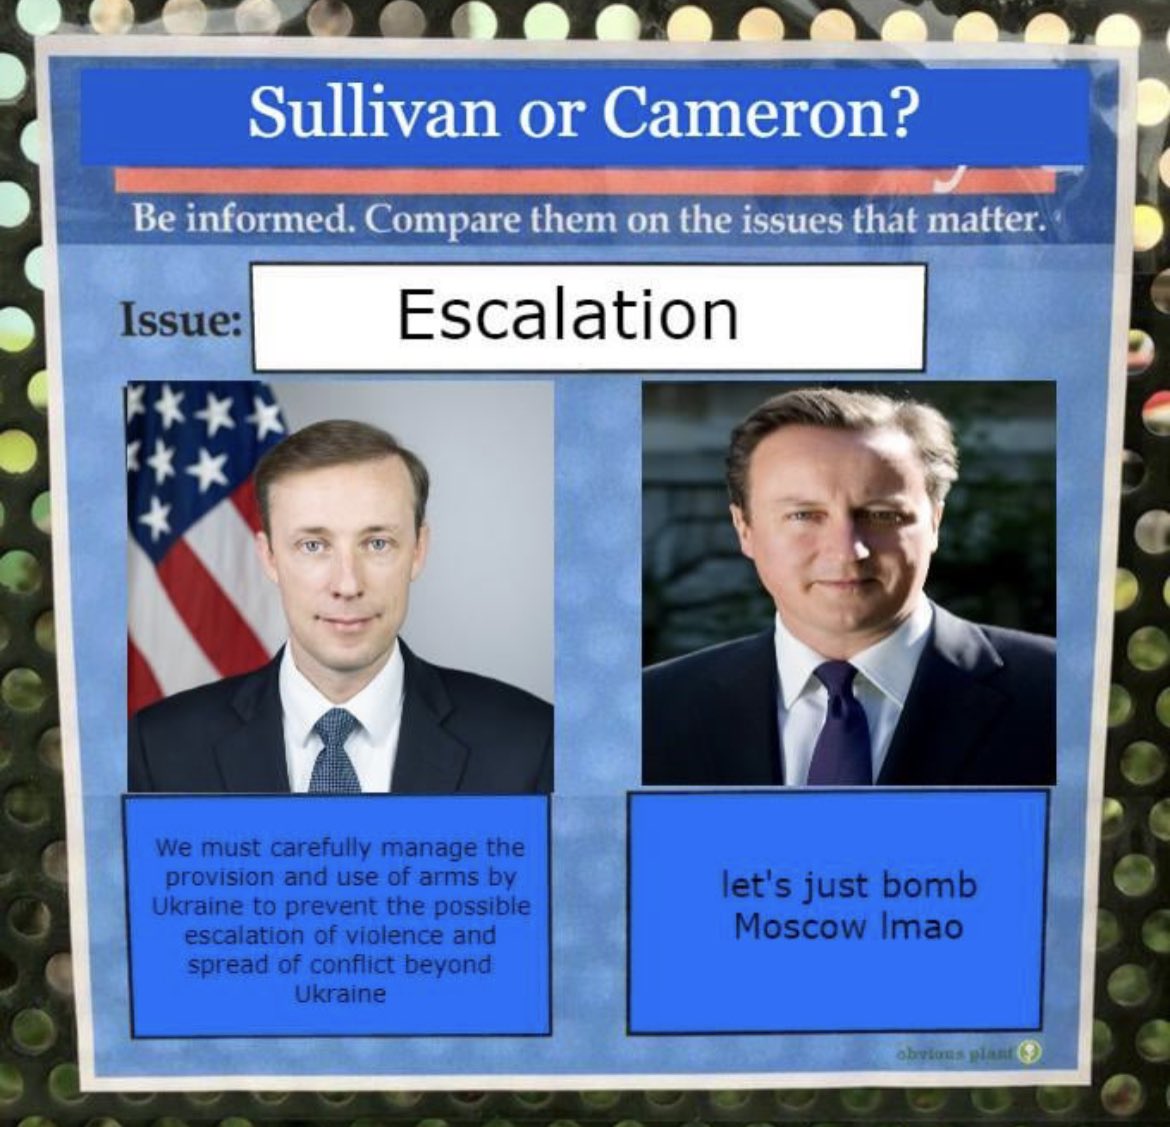 We need a separate NATSEC advisor to deal with Russia and Ukraine. Jake Sullivans “hmmm let’s not do anything too inflammatory” no longer works once the bullets are flying. The ONLY reason Sullivan is kept around by the admin is he is good at dealing with China, that is it.